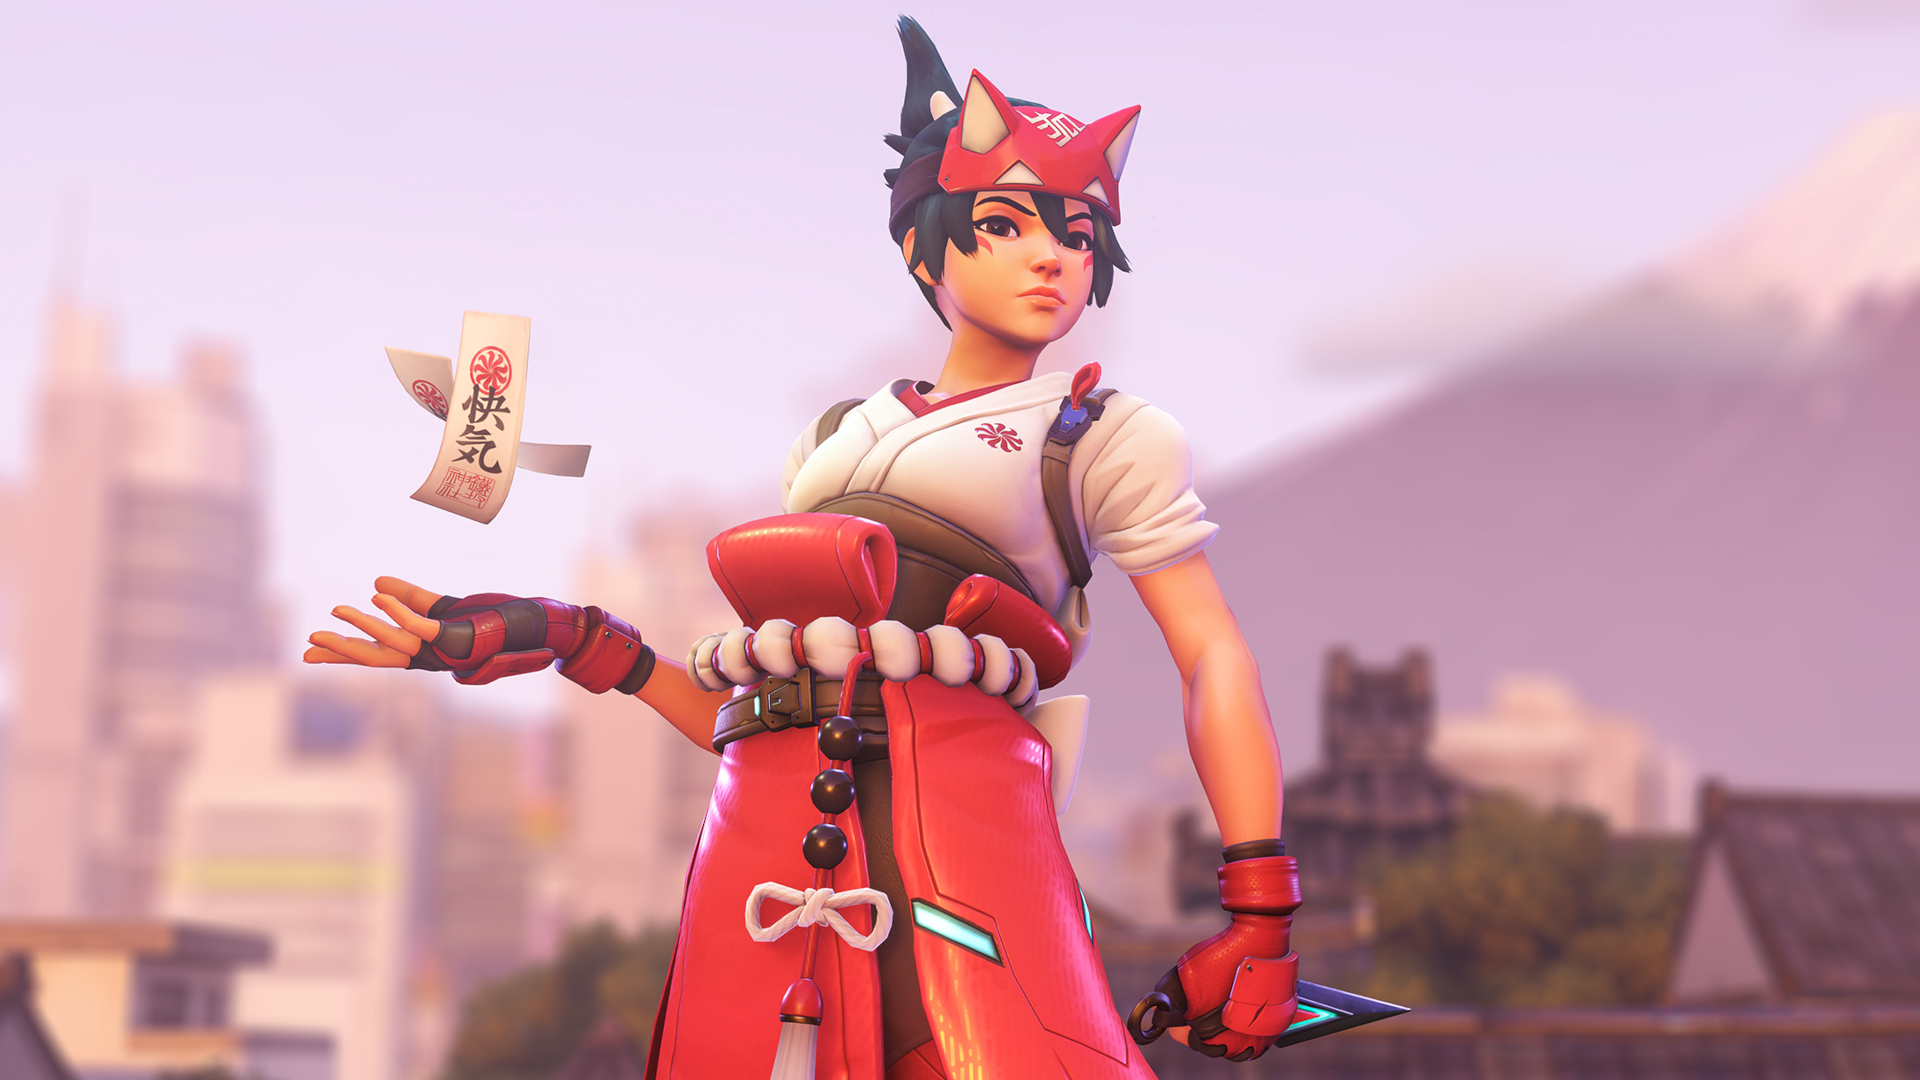 Kiriko in Overwatch 2 holding a knife and levitating two small parchments